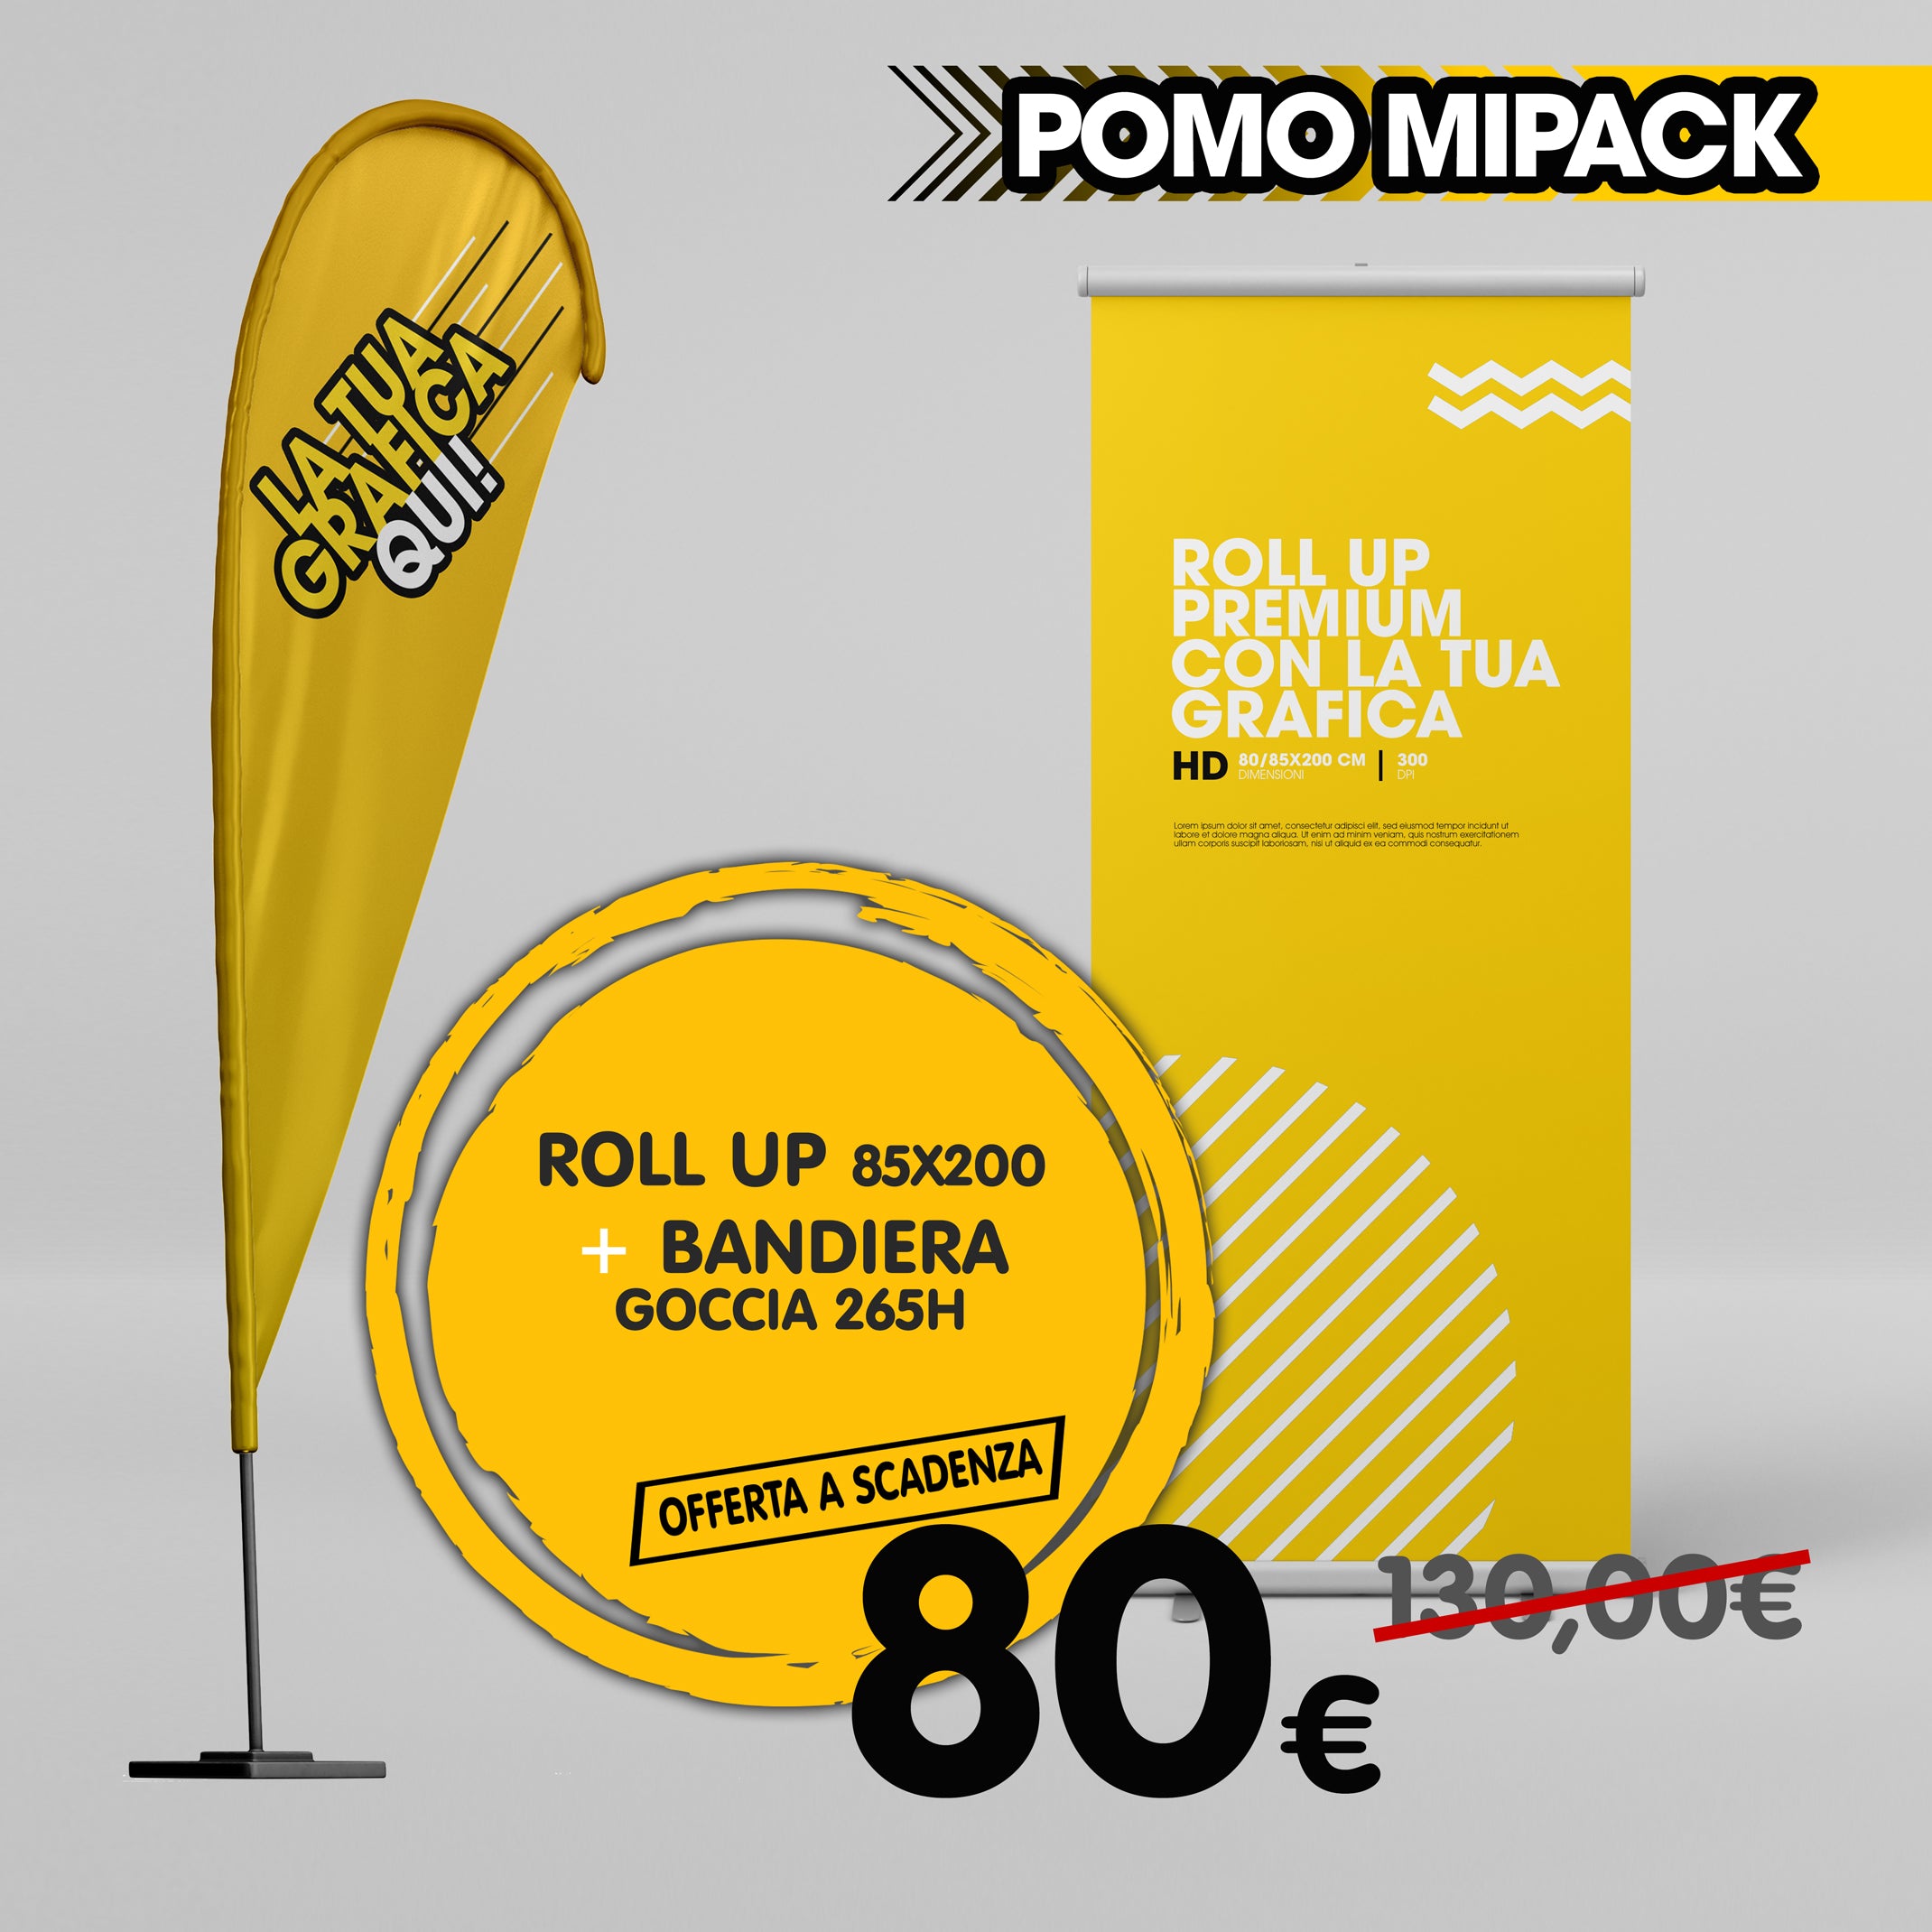 Promo mipack Roll-Up , Bandiera